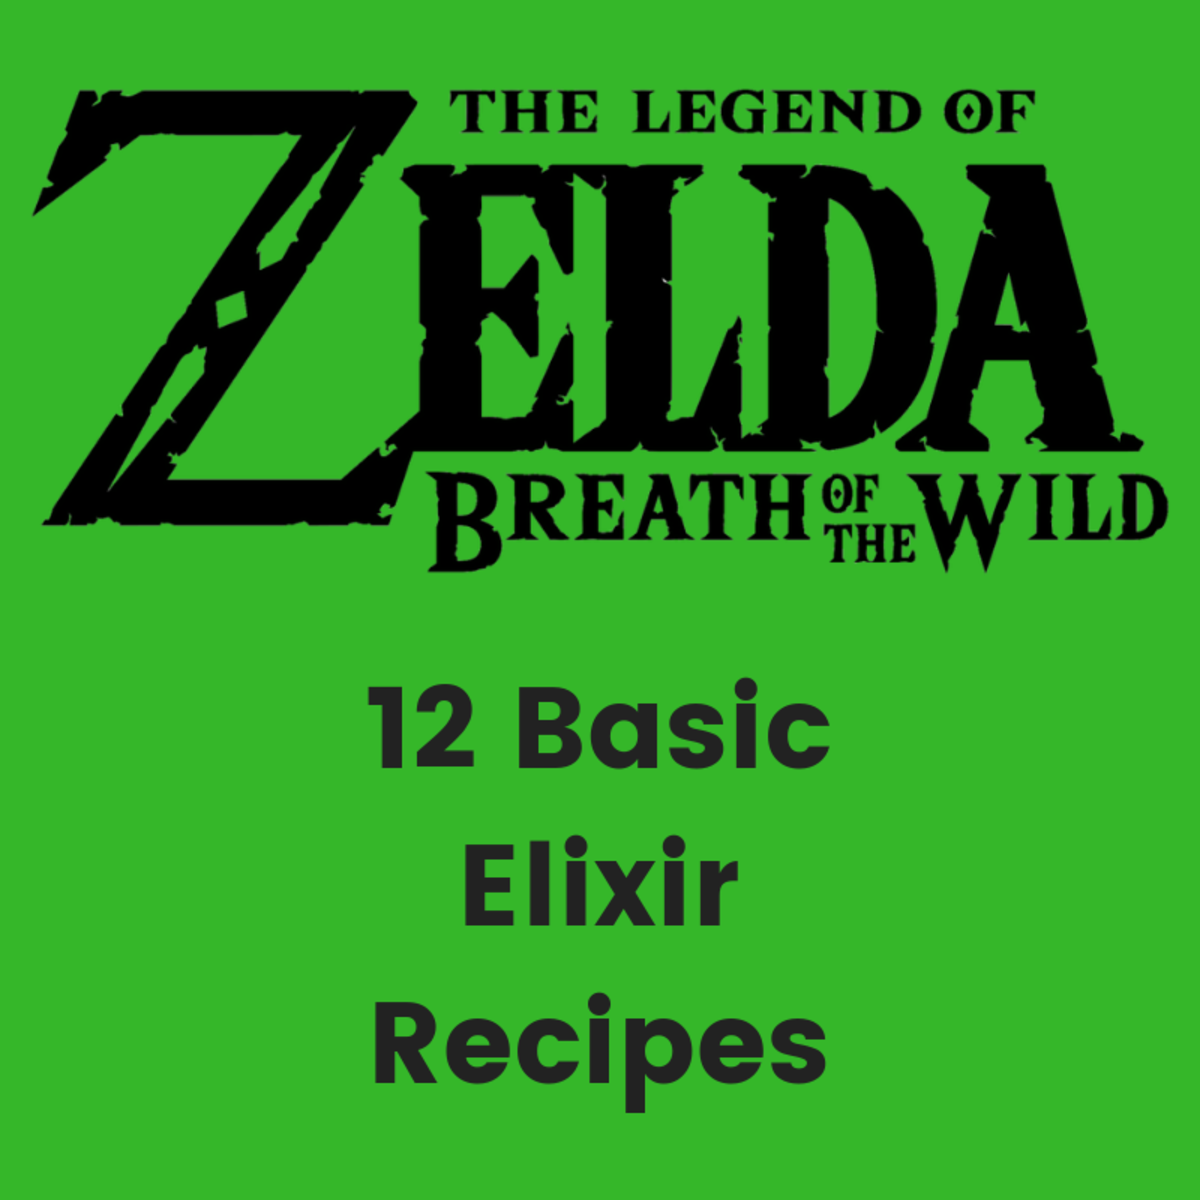 Here is a list of how to make the 12 basic elixirs and variations.